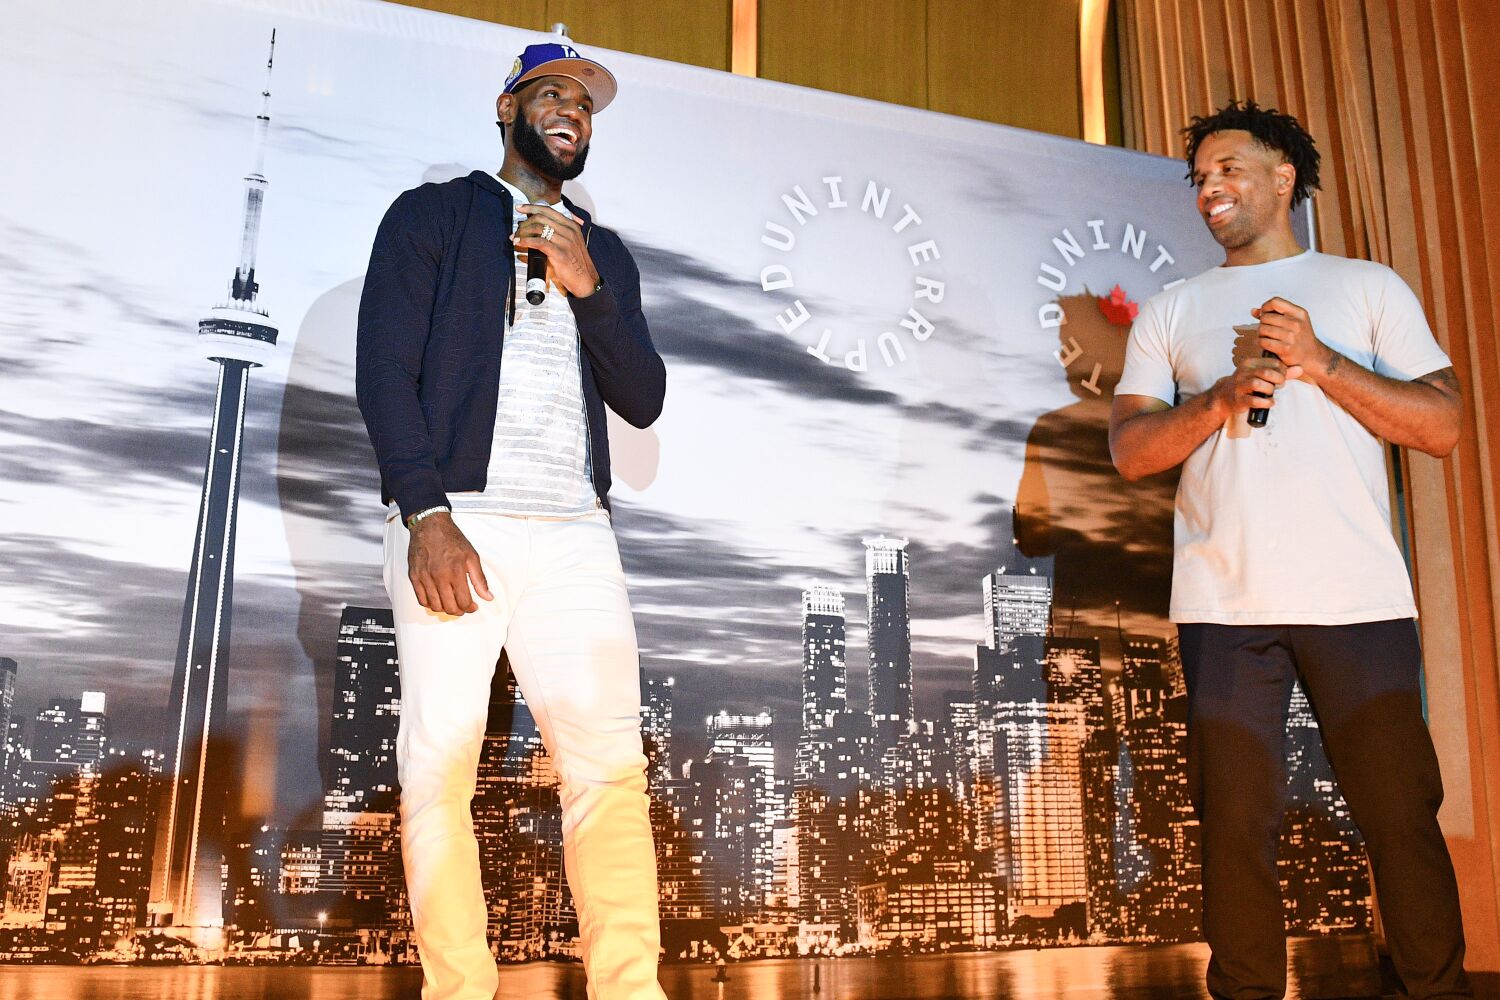 LeBron James' company to host film festival in L.A. focused on empowering athletes